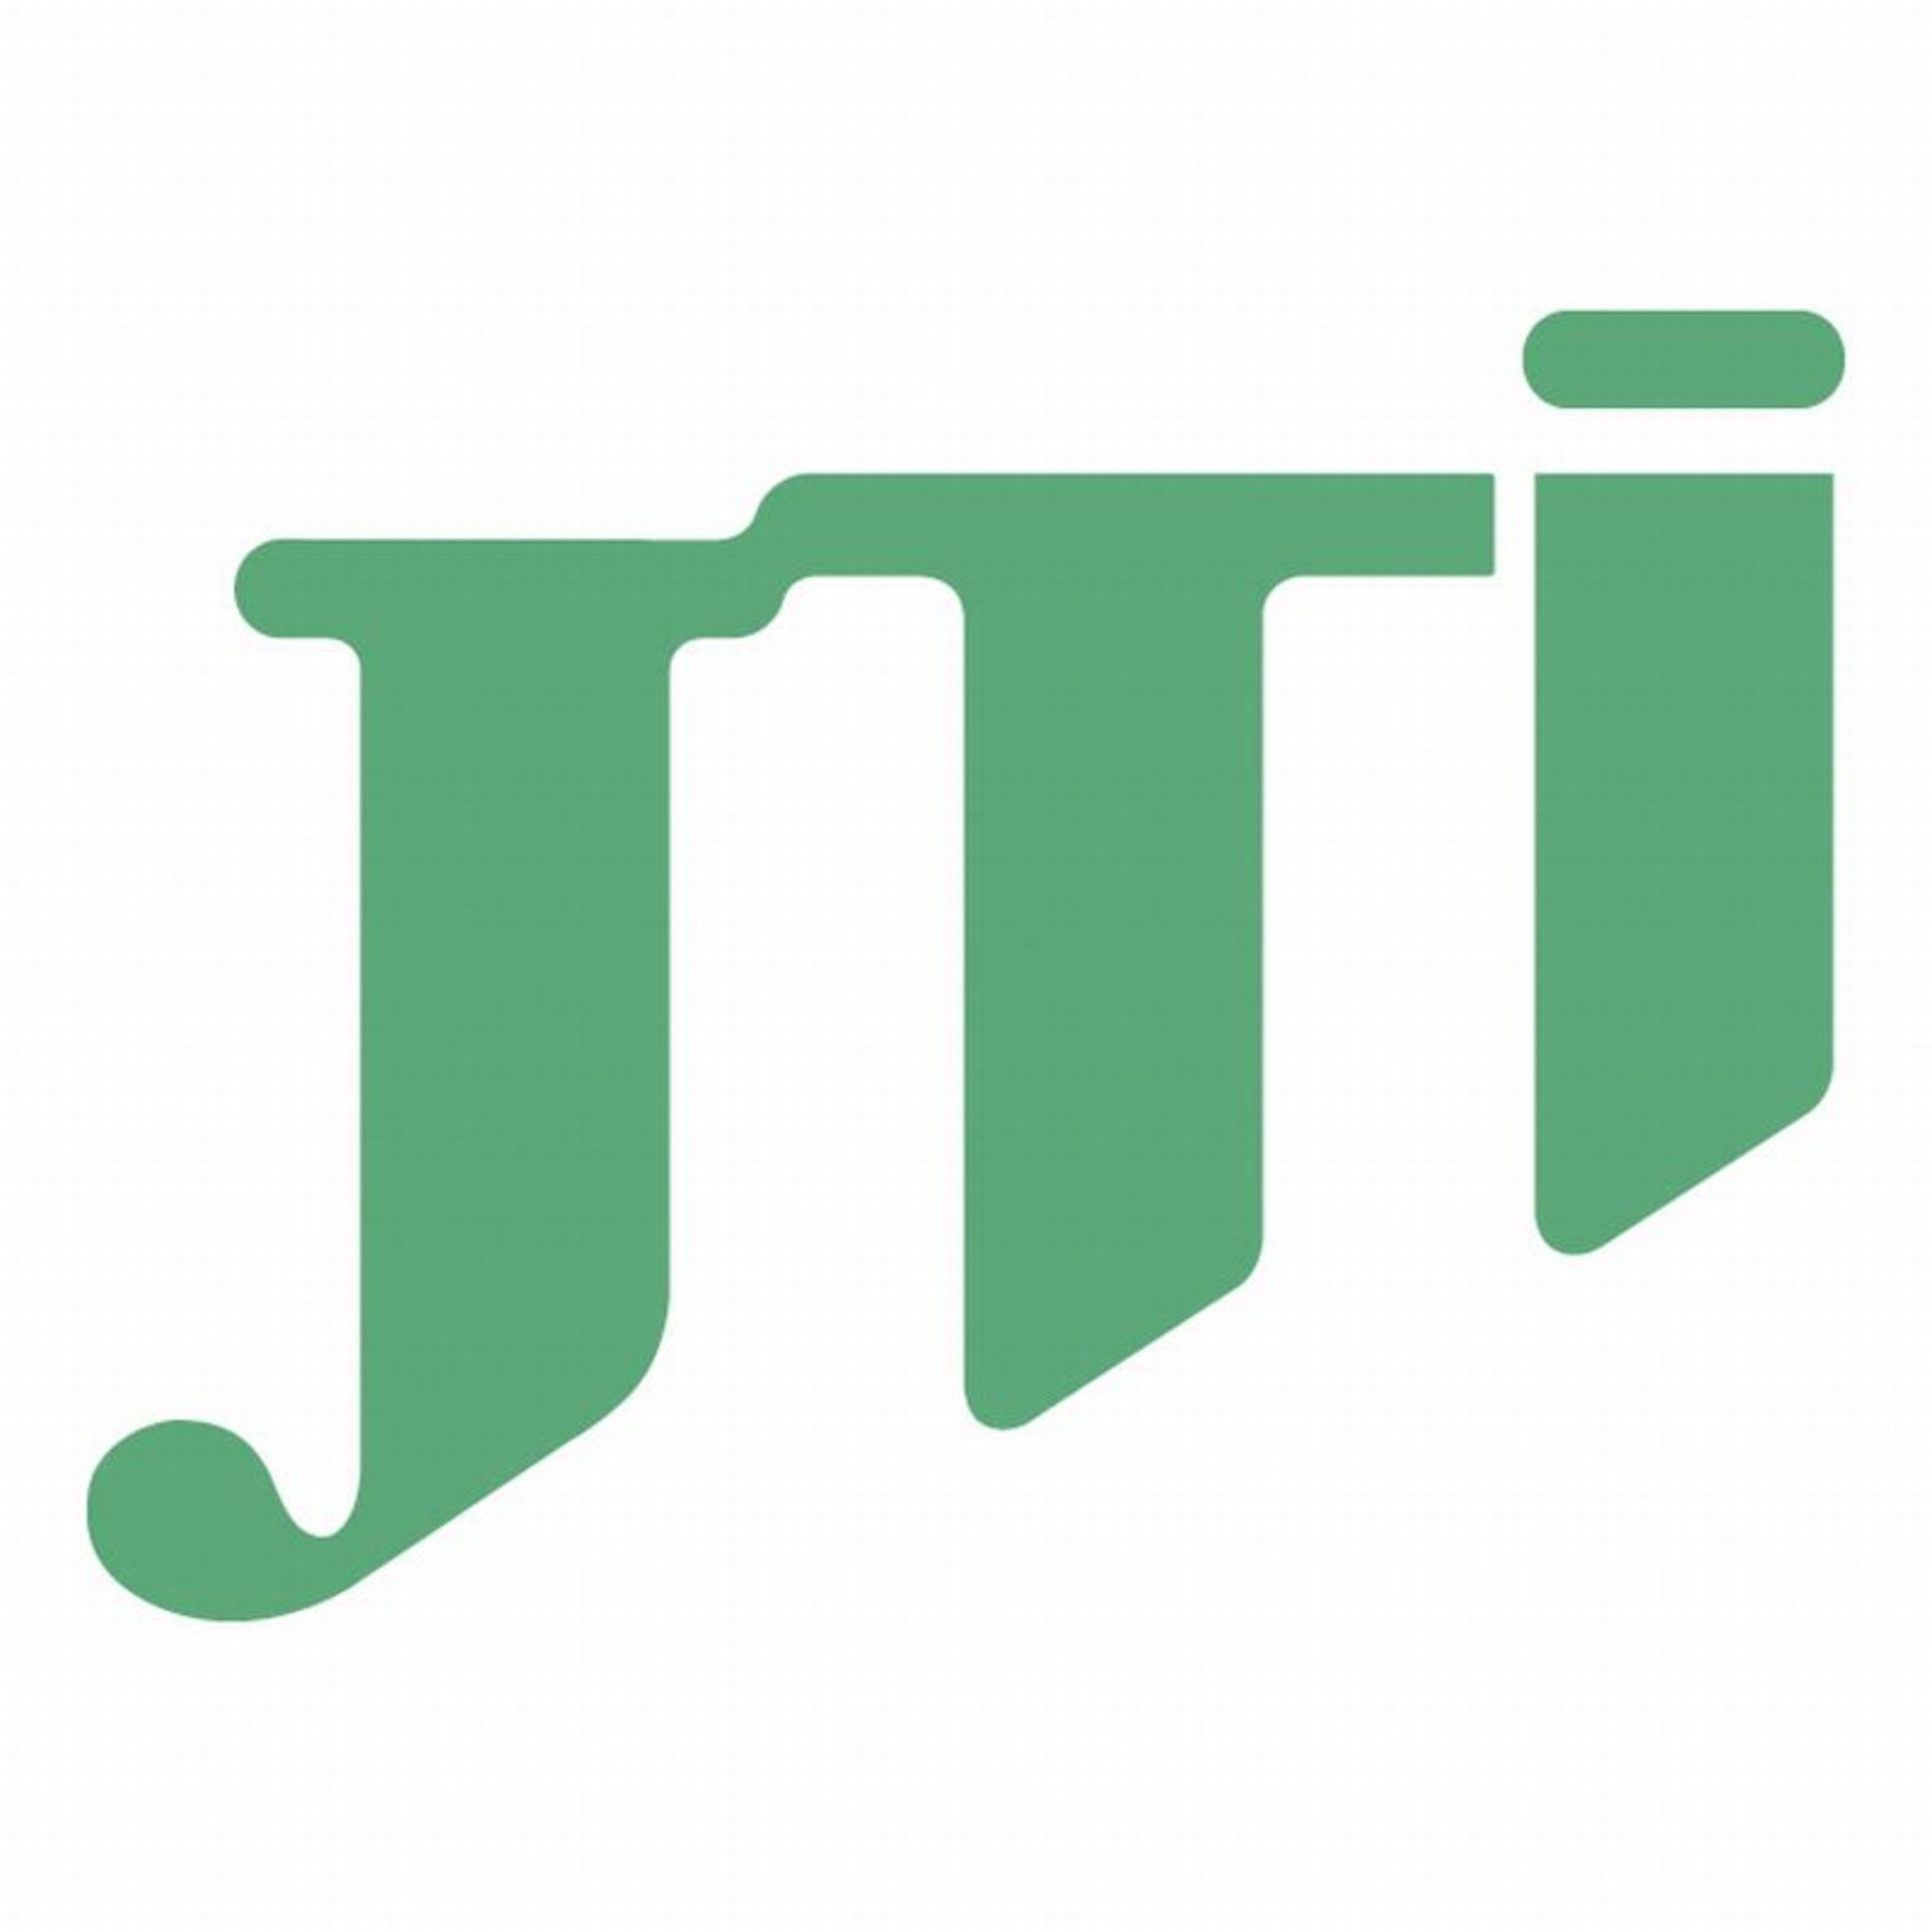 Logo JTI Japan Tobacco International. Further text by ots and under www.presseportal.ch. The use of this picture is for editorial purposes free of charge. Publishment under source: "OTS.photo/JTI Japan Tobacco International". (PRNewsFoto/JTI INTERNATIONAL SA)